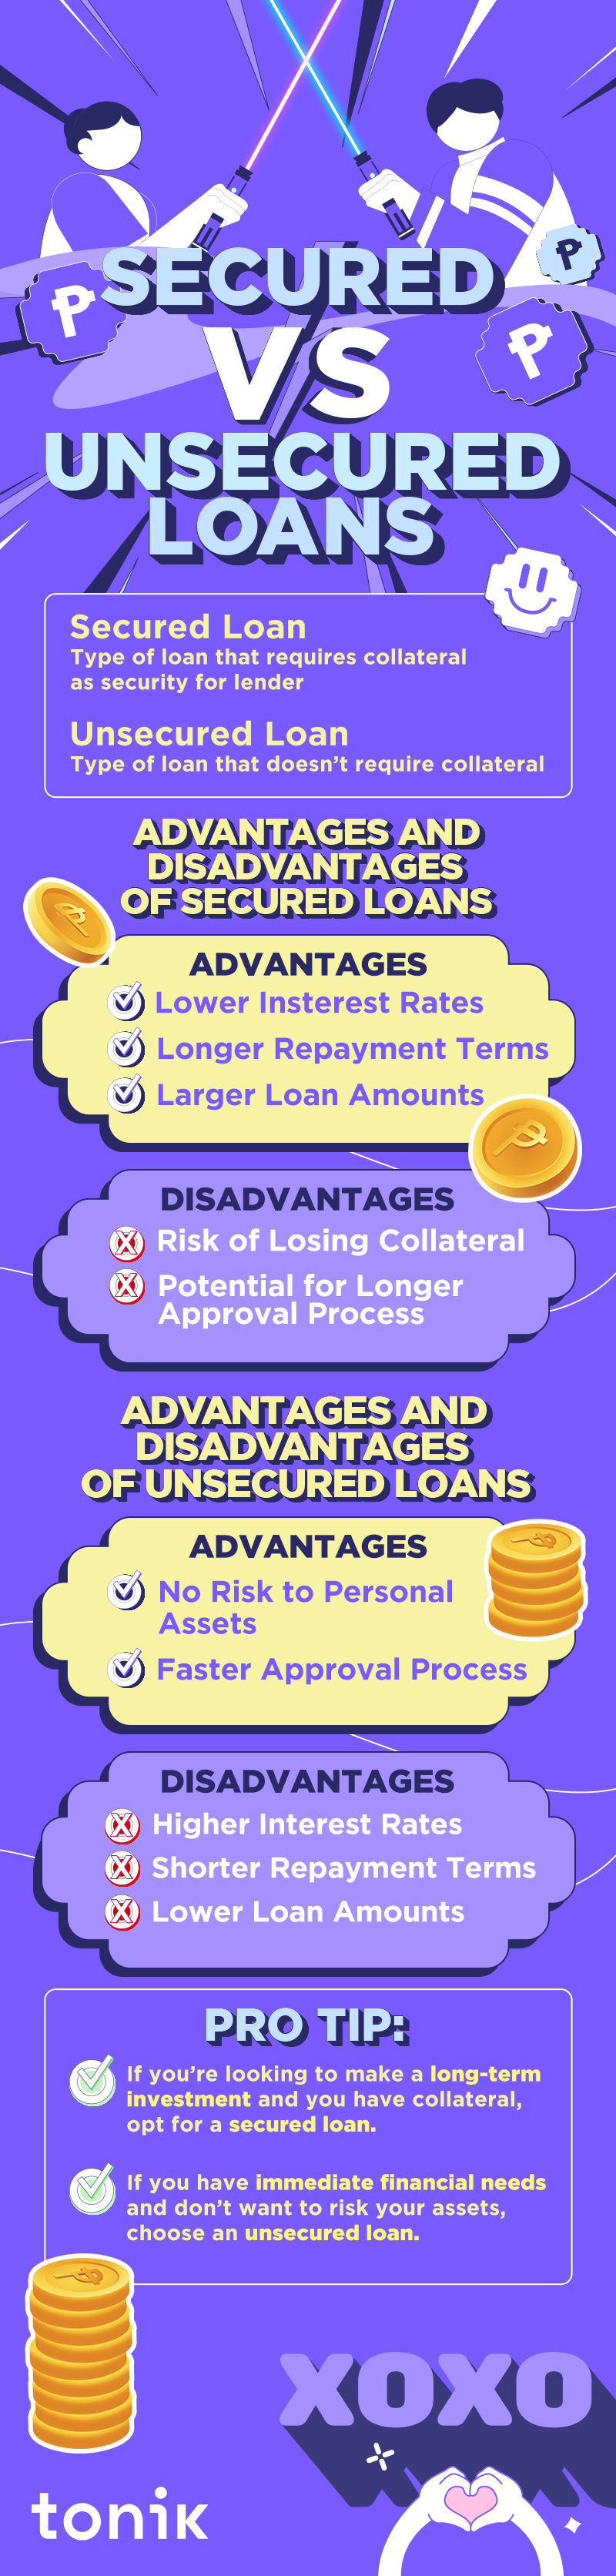 infographic that compares secured loans from unsecured loans